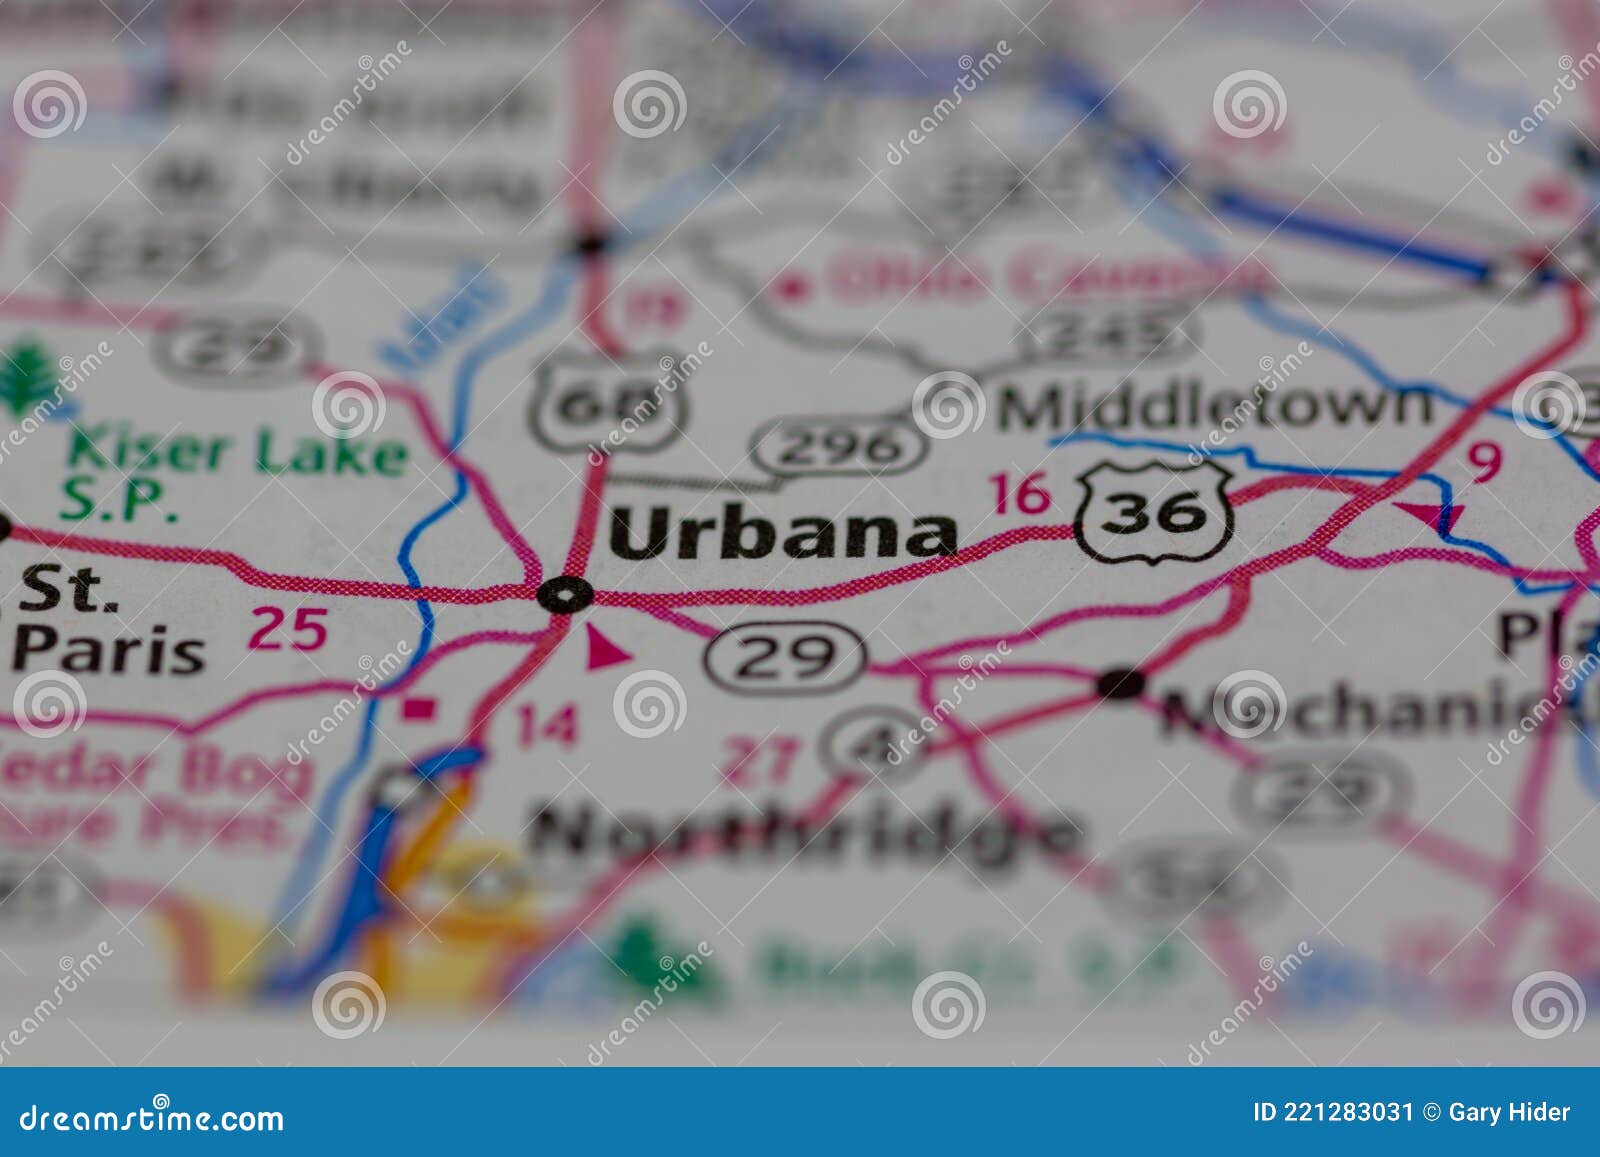 06-14-2021 portsmouth, hampshire, uk, urbana ohio usa shown on a geography map or road map